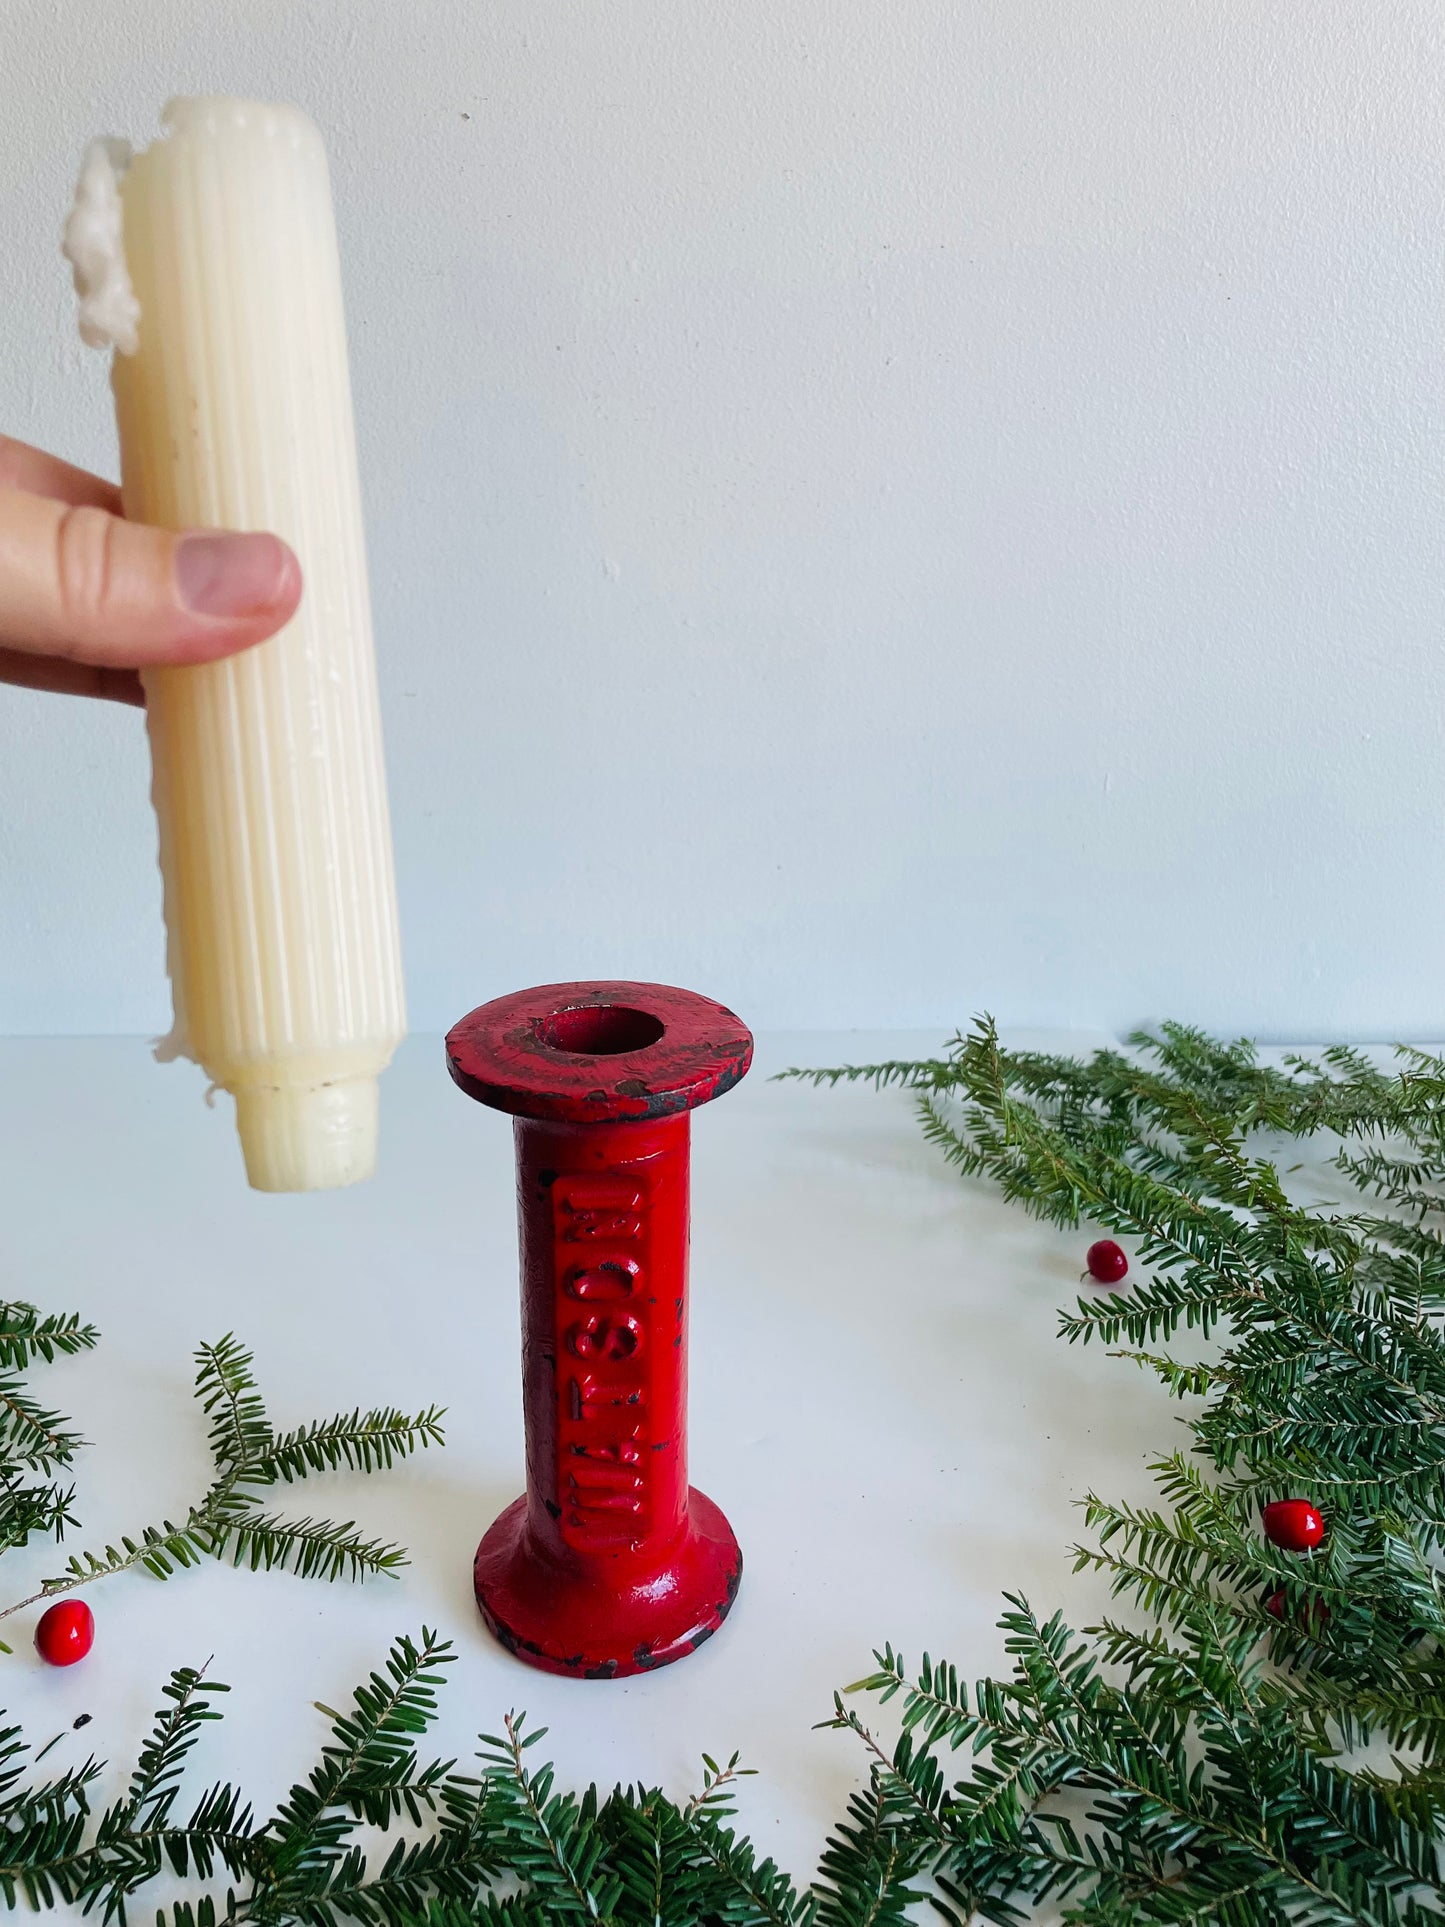 Solid & Heavy Red Whipper Watson Dumbbell Weight Handle - Makes a Great Candle Holder!